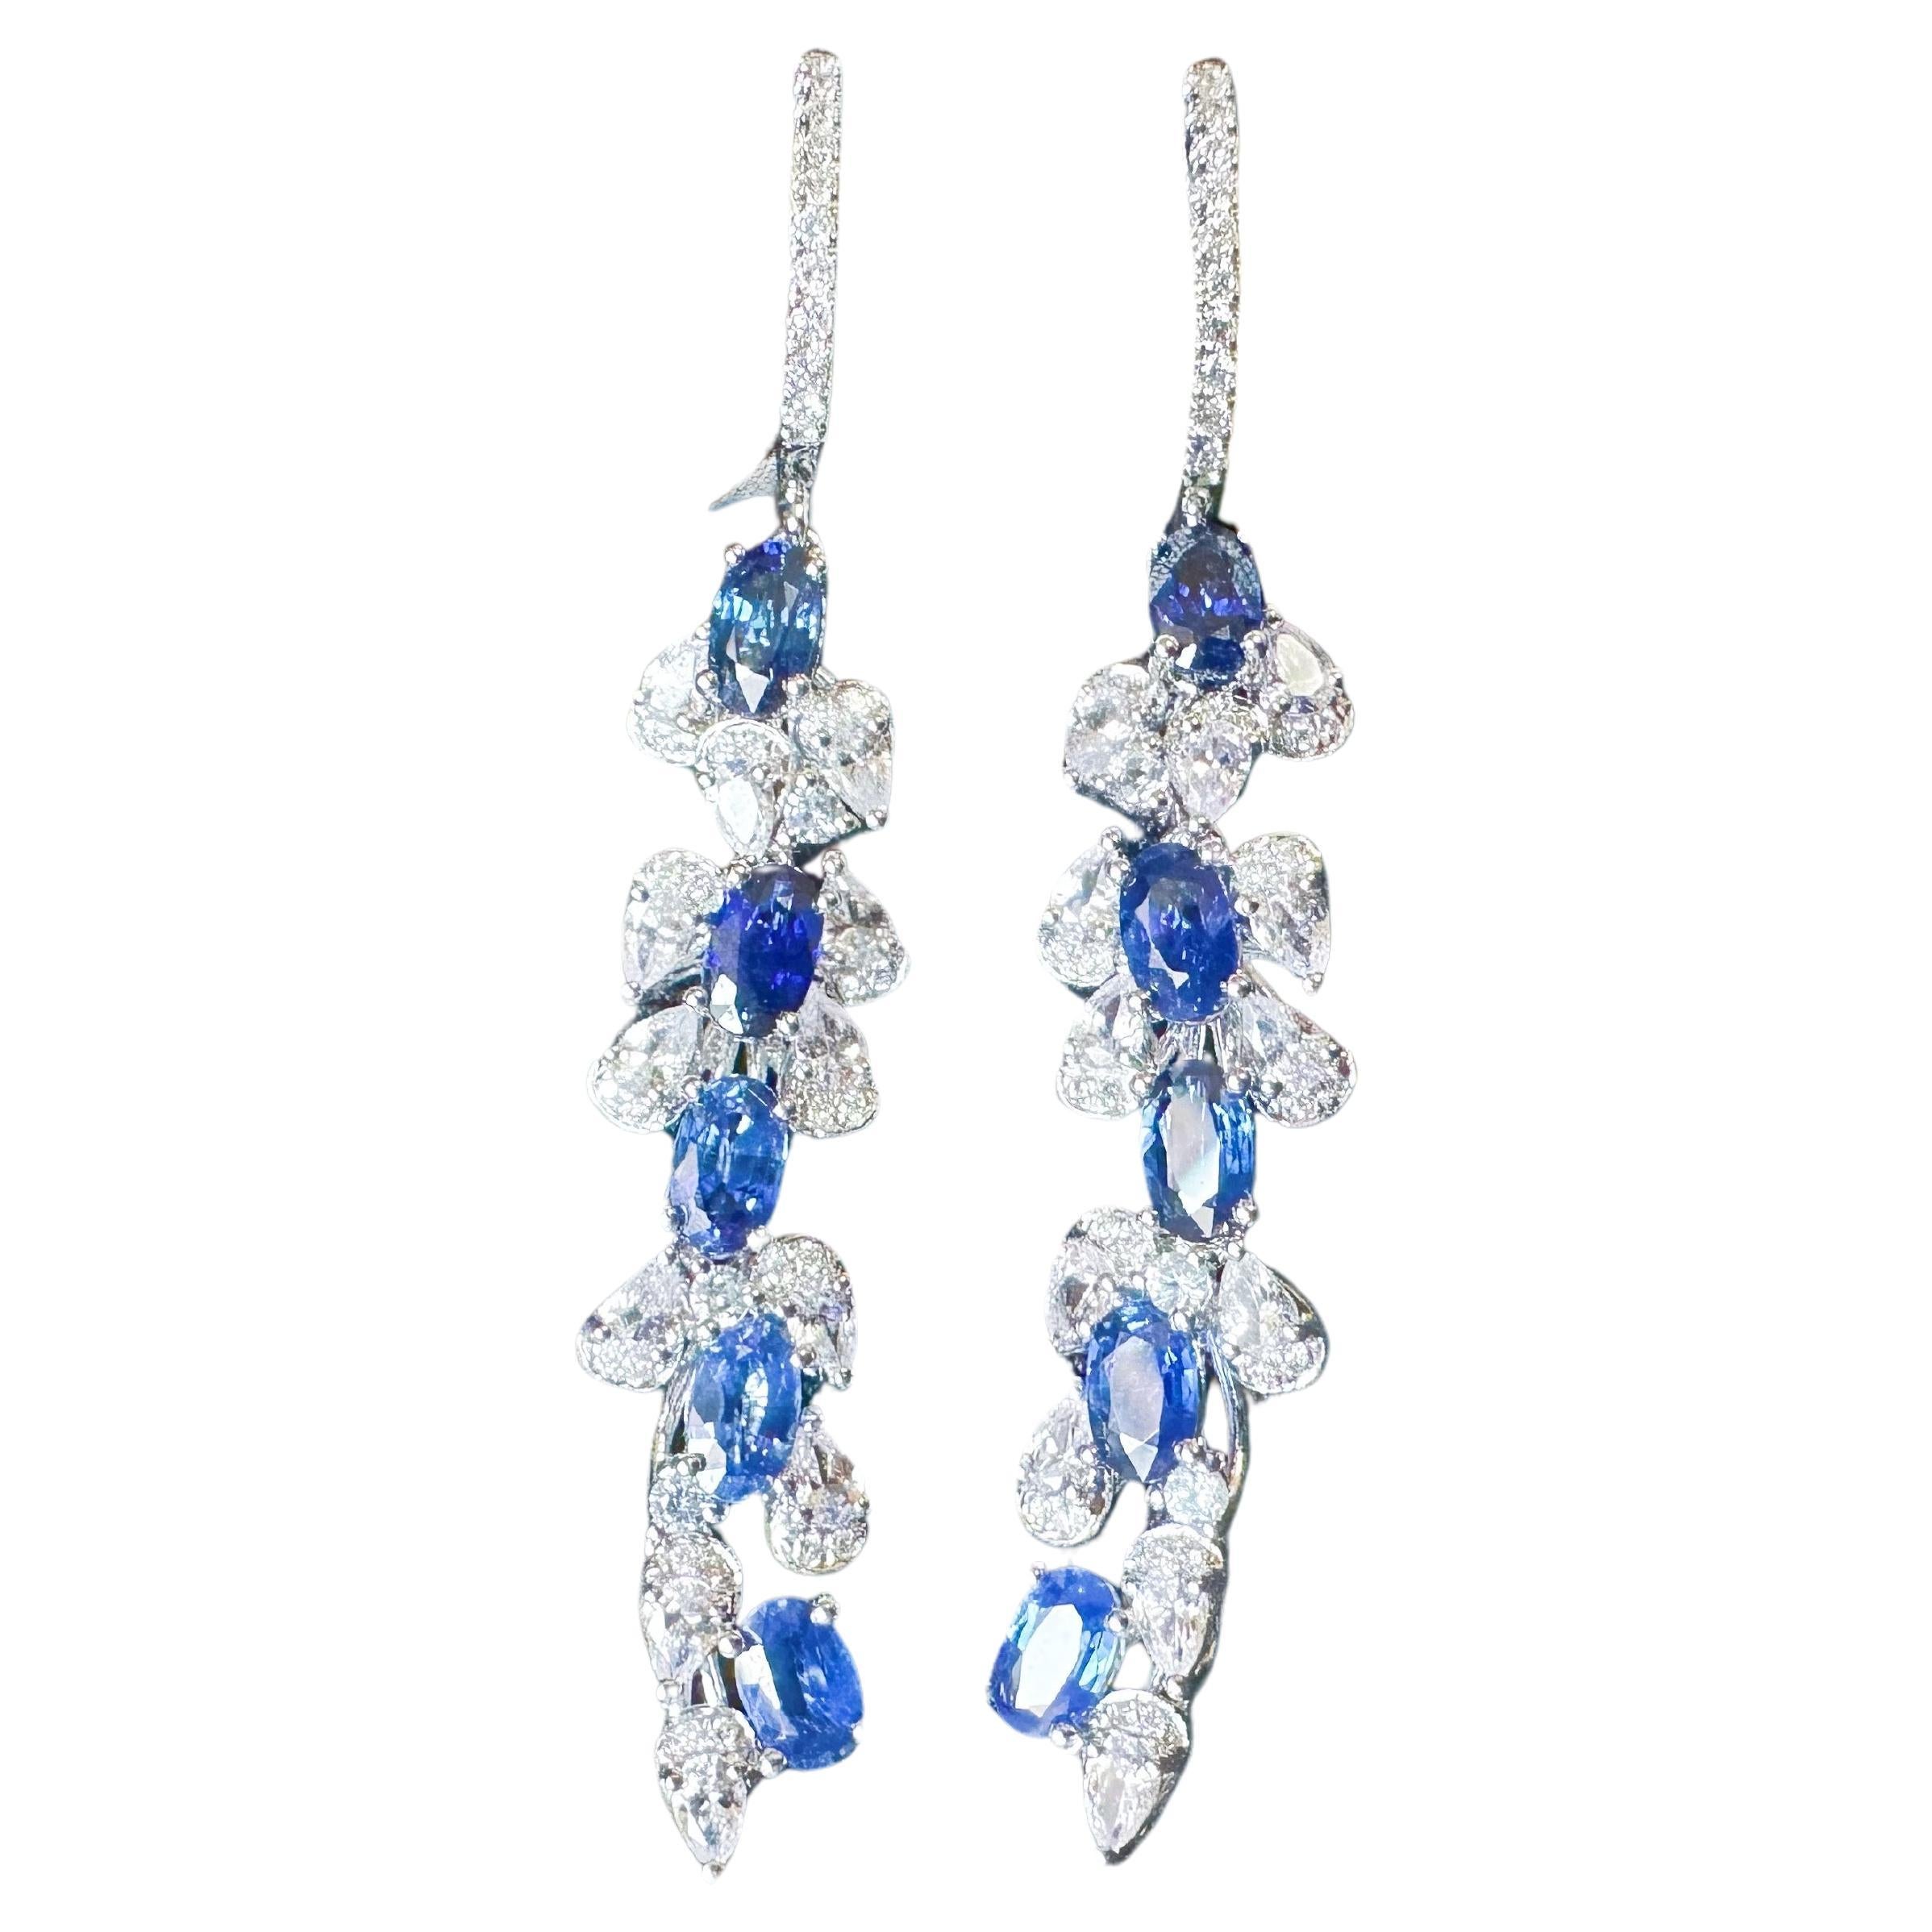 Elevate your style with our timeless and elegant dangle earrings. These exquisite earrings feature royal blue sapphires, diamonds, and white sapphires, carefully handcrafted to perfection.

With their meticulous craftsmanship, these earrings make a